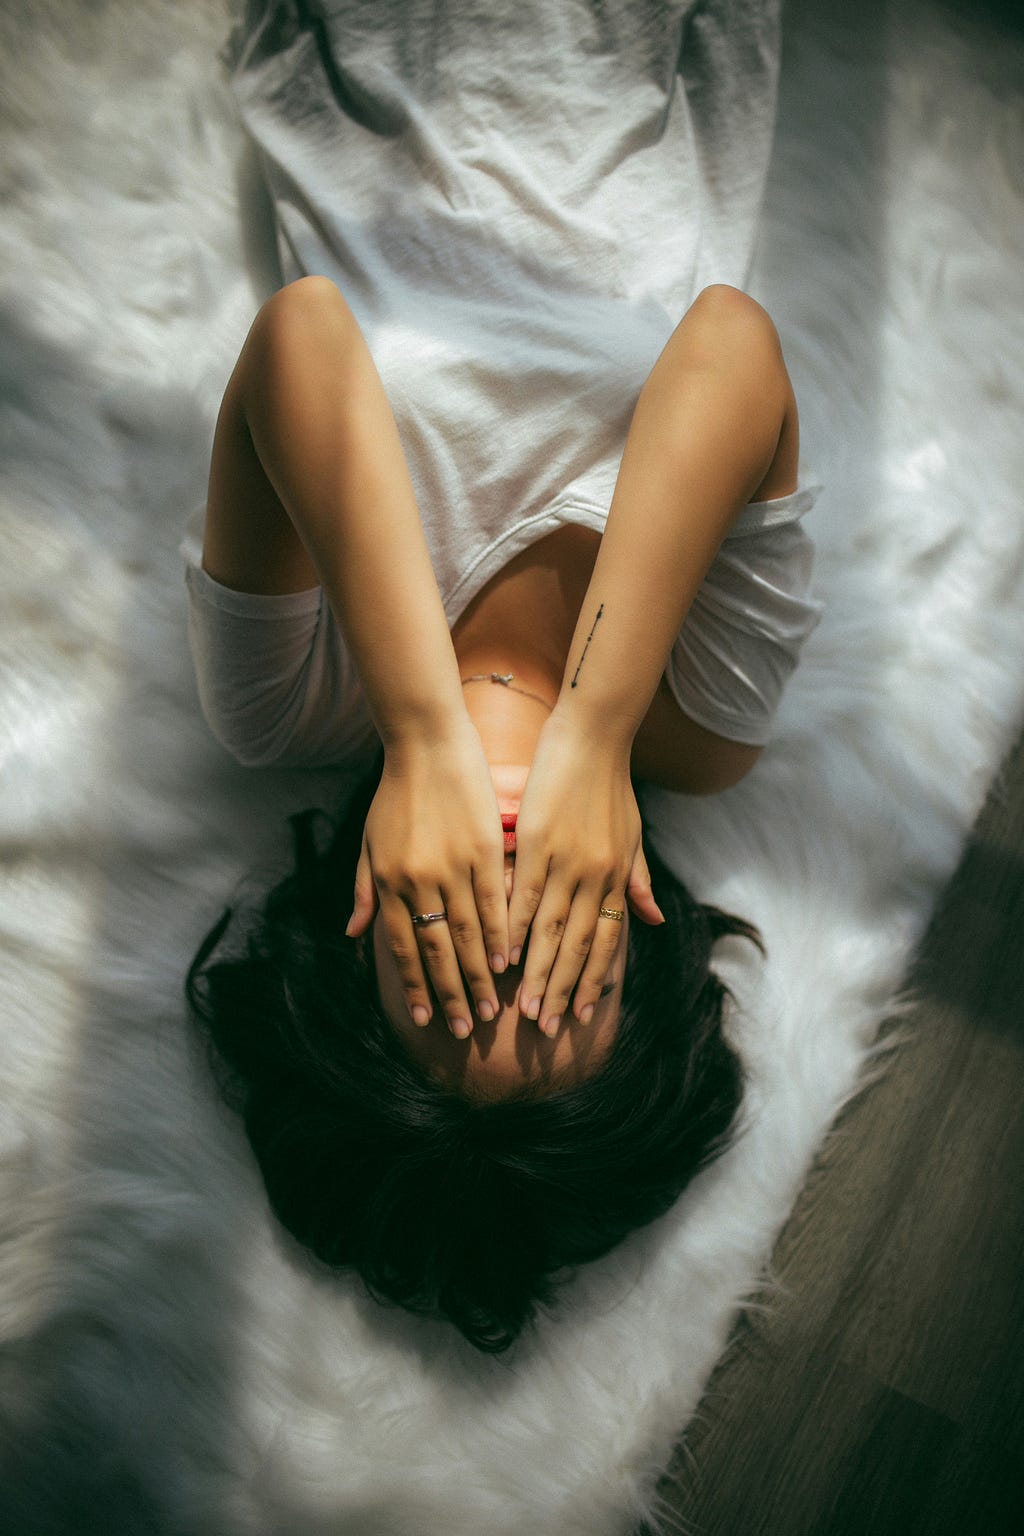 A girl lying on the bed covering her eyes